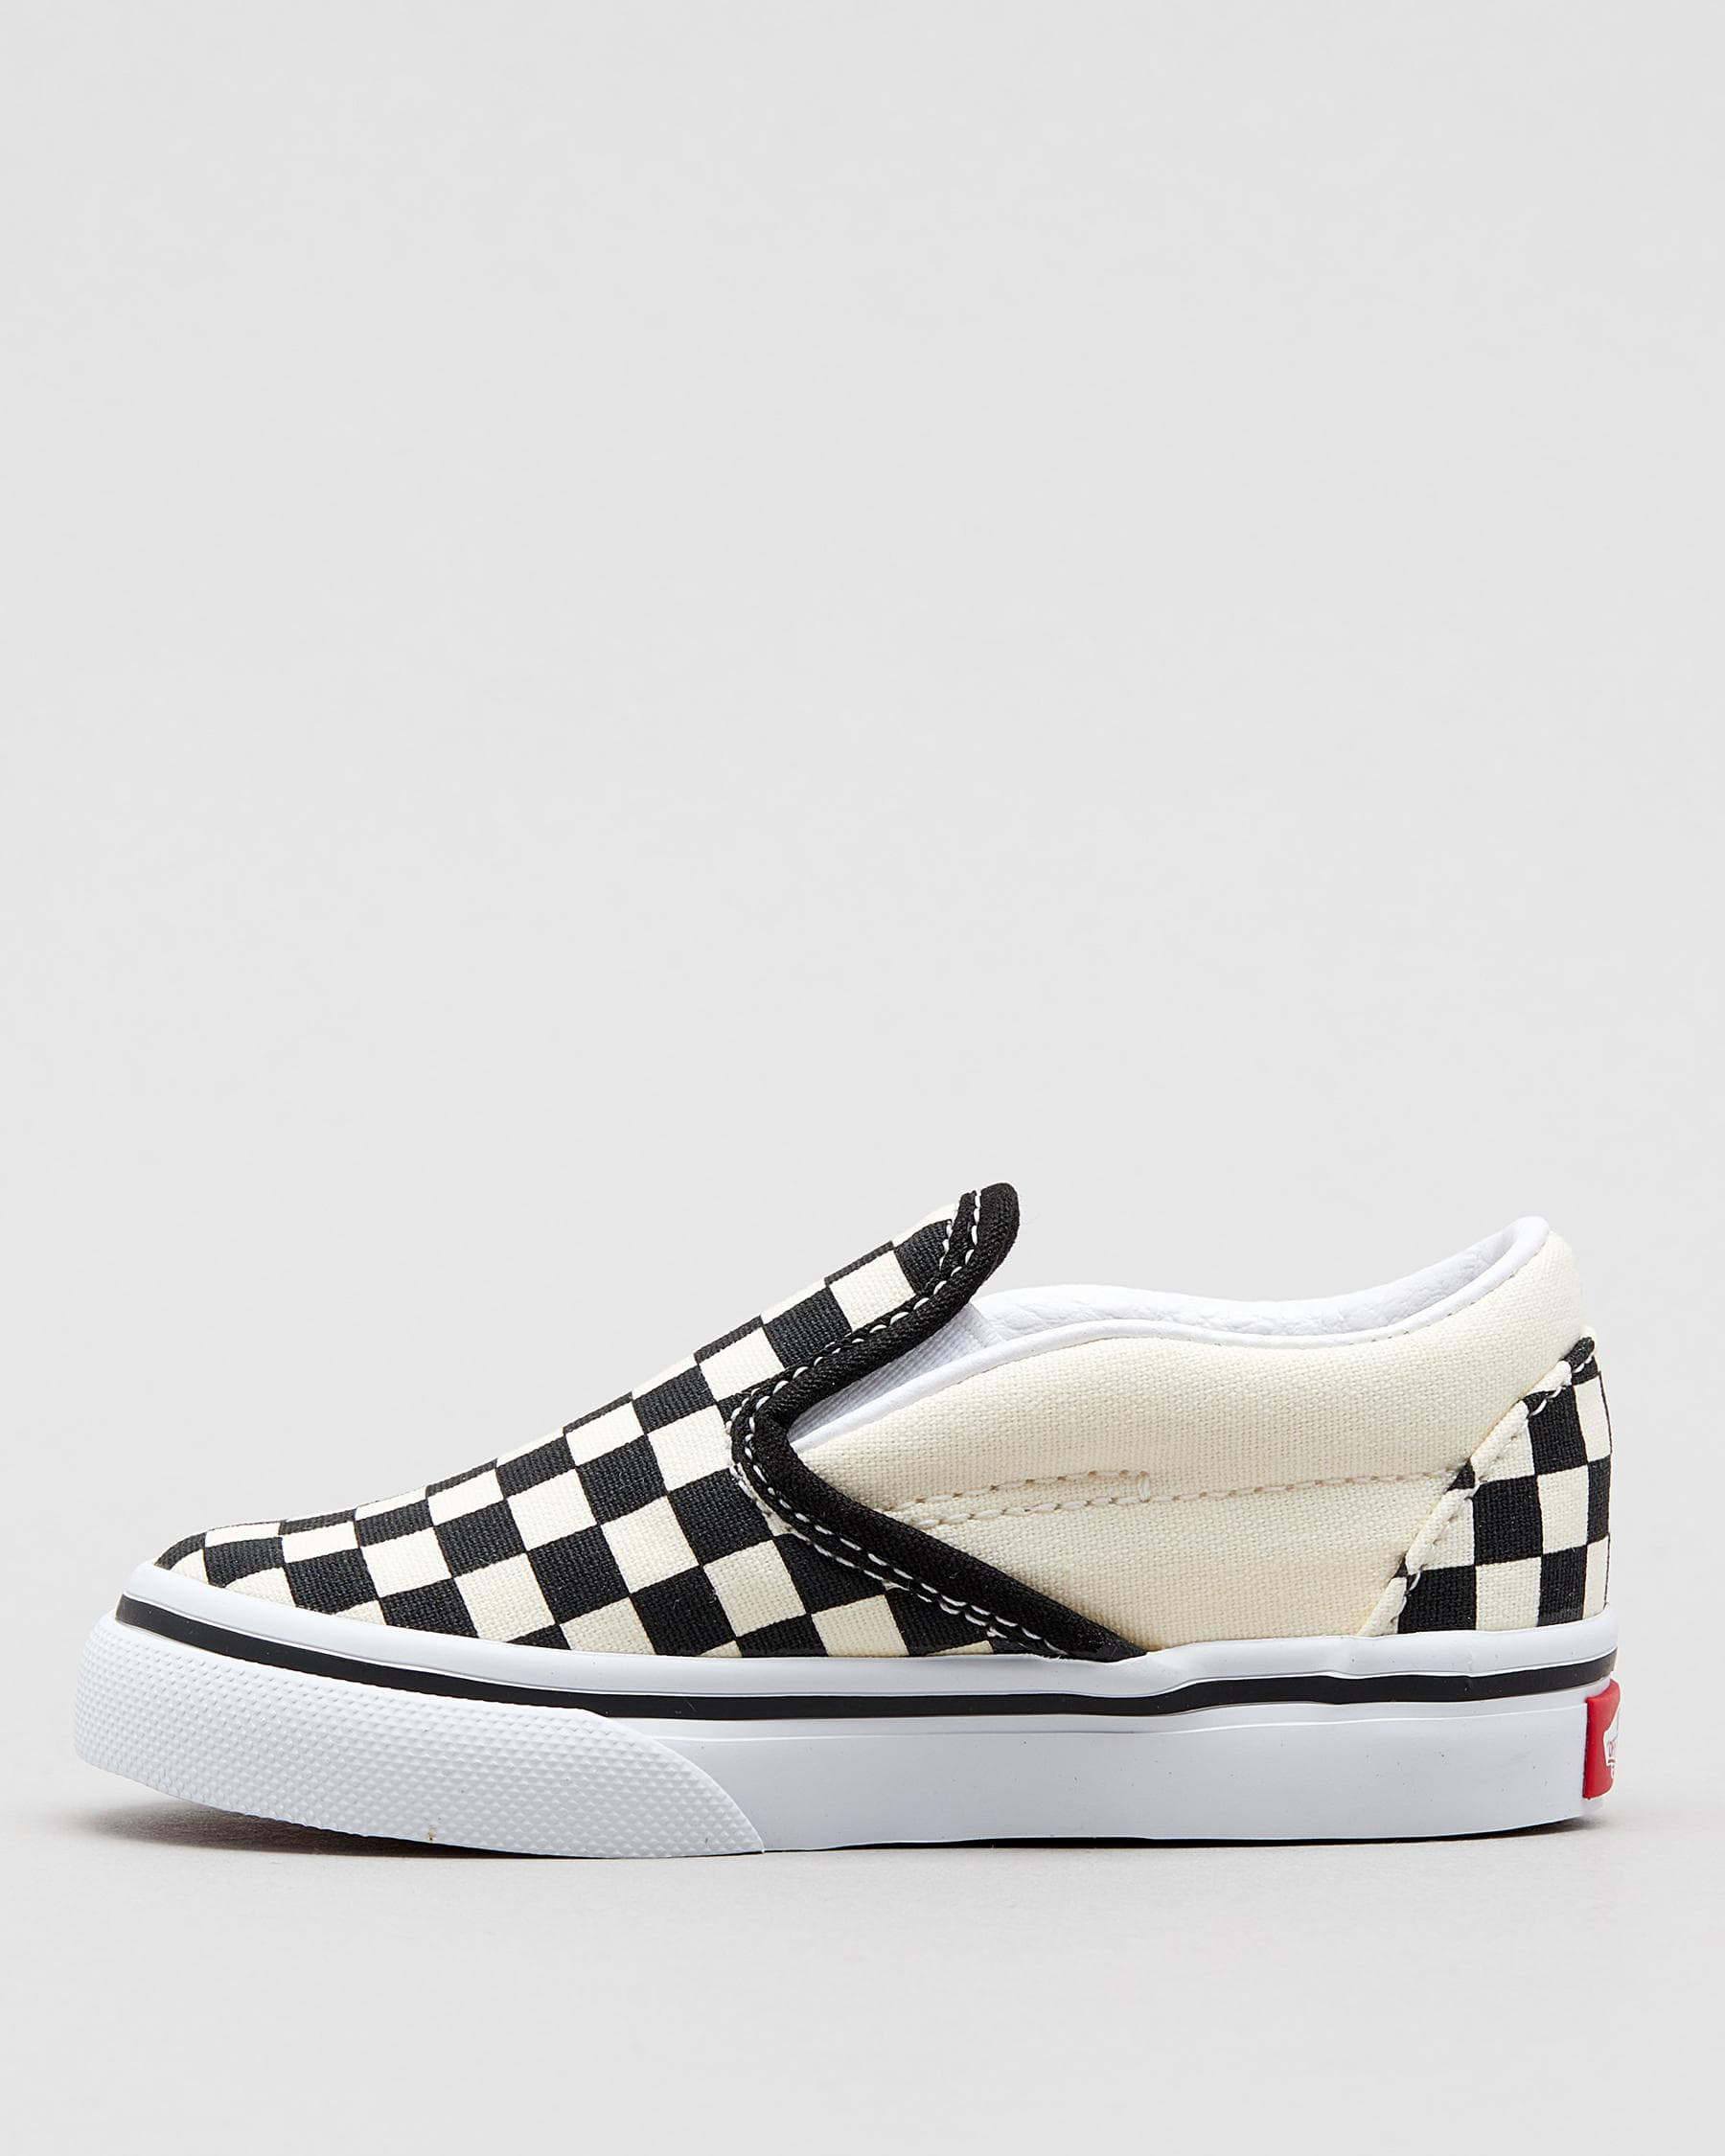 Shop Vans Toddlers' Classic Slip-On Shoes In Black And White Checkerbo ...